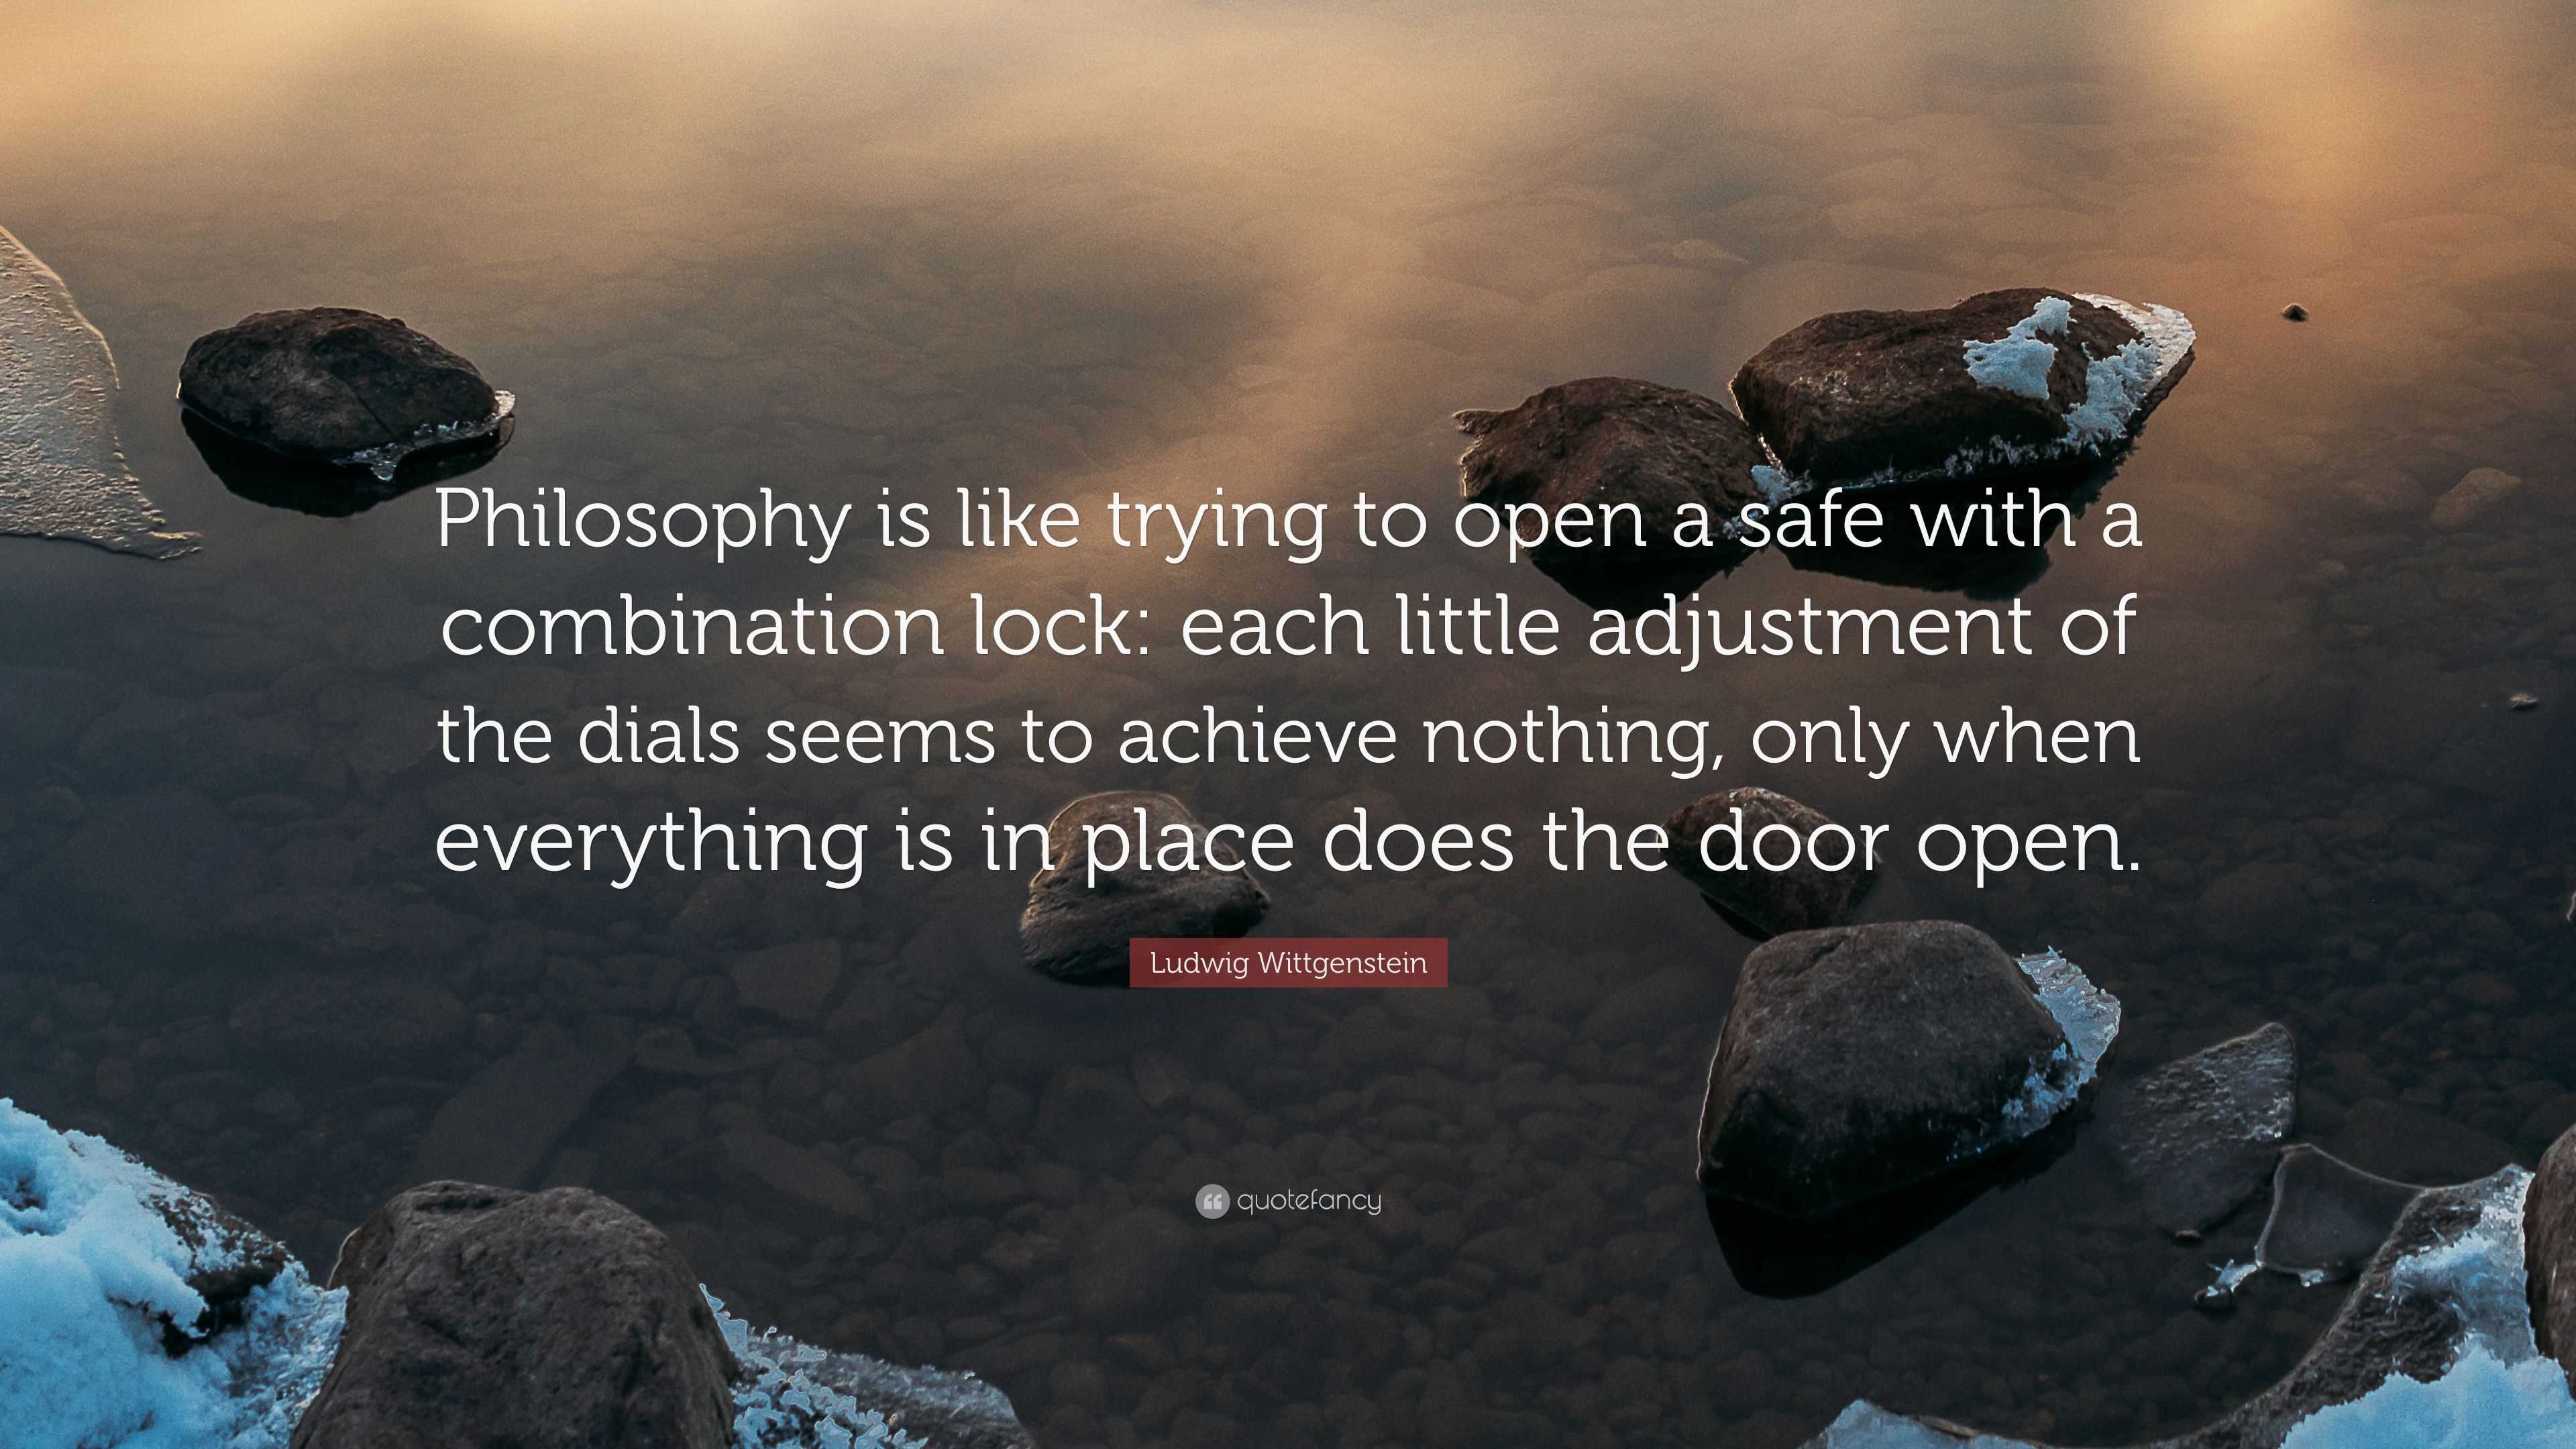 Ludwig Wittgenstein quote: Philosophy is like trying to open a safe with  a